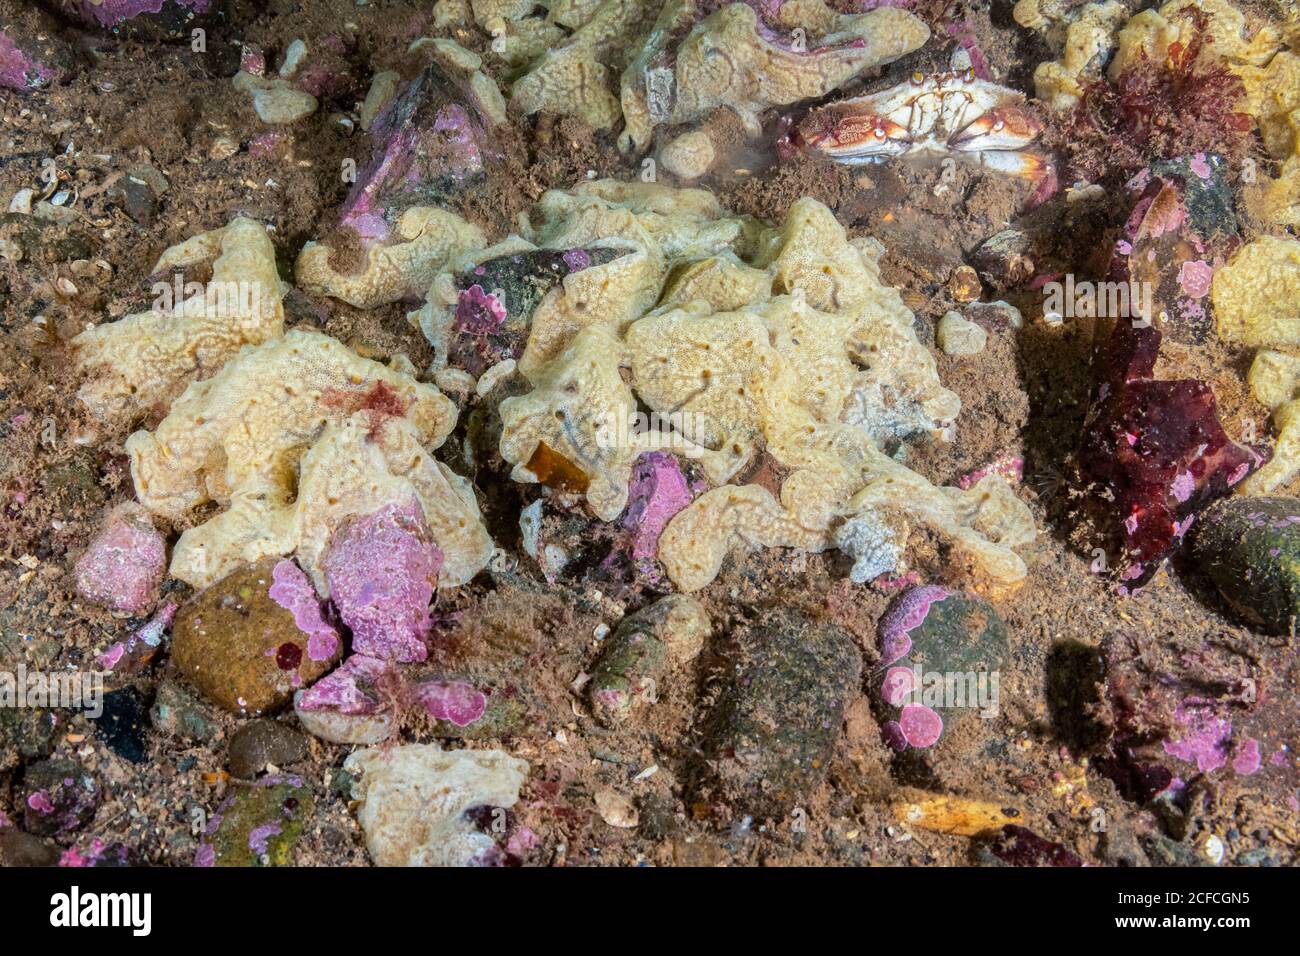 Compound sea squirt, Didemnum vexillum, a chordate marine animal, in the Gulf of Maine. This invasive colonial tunicate is a quickly spreading tunicat Stock Photo